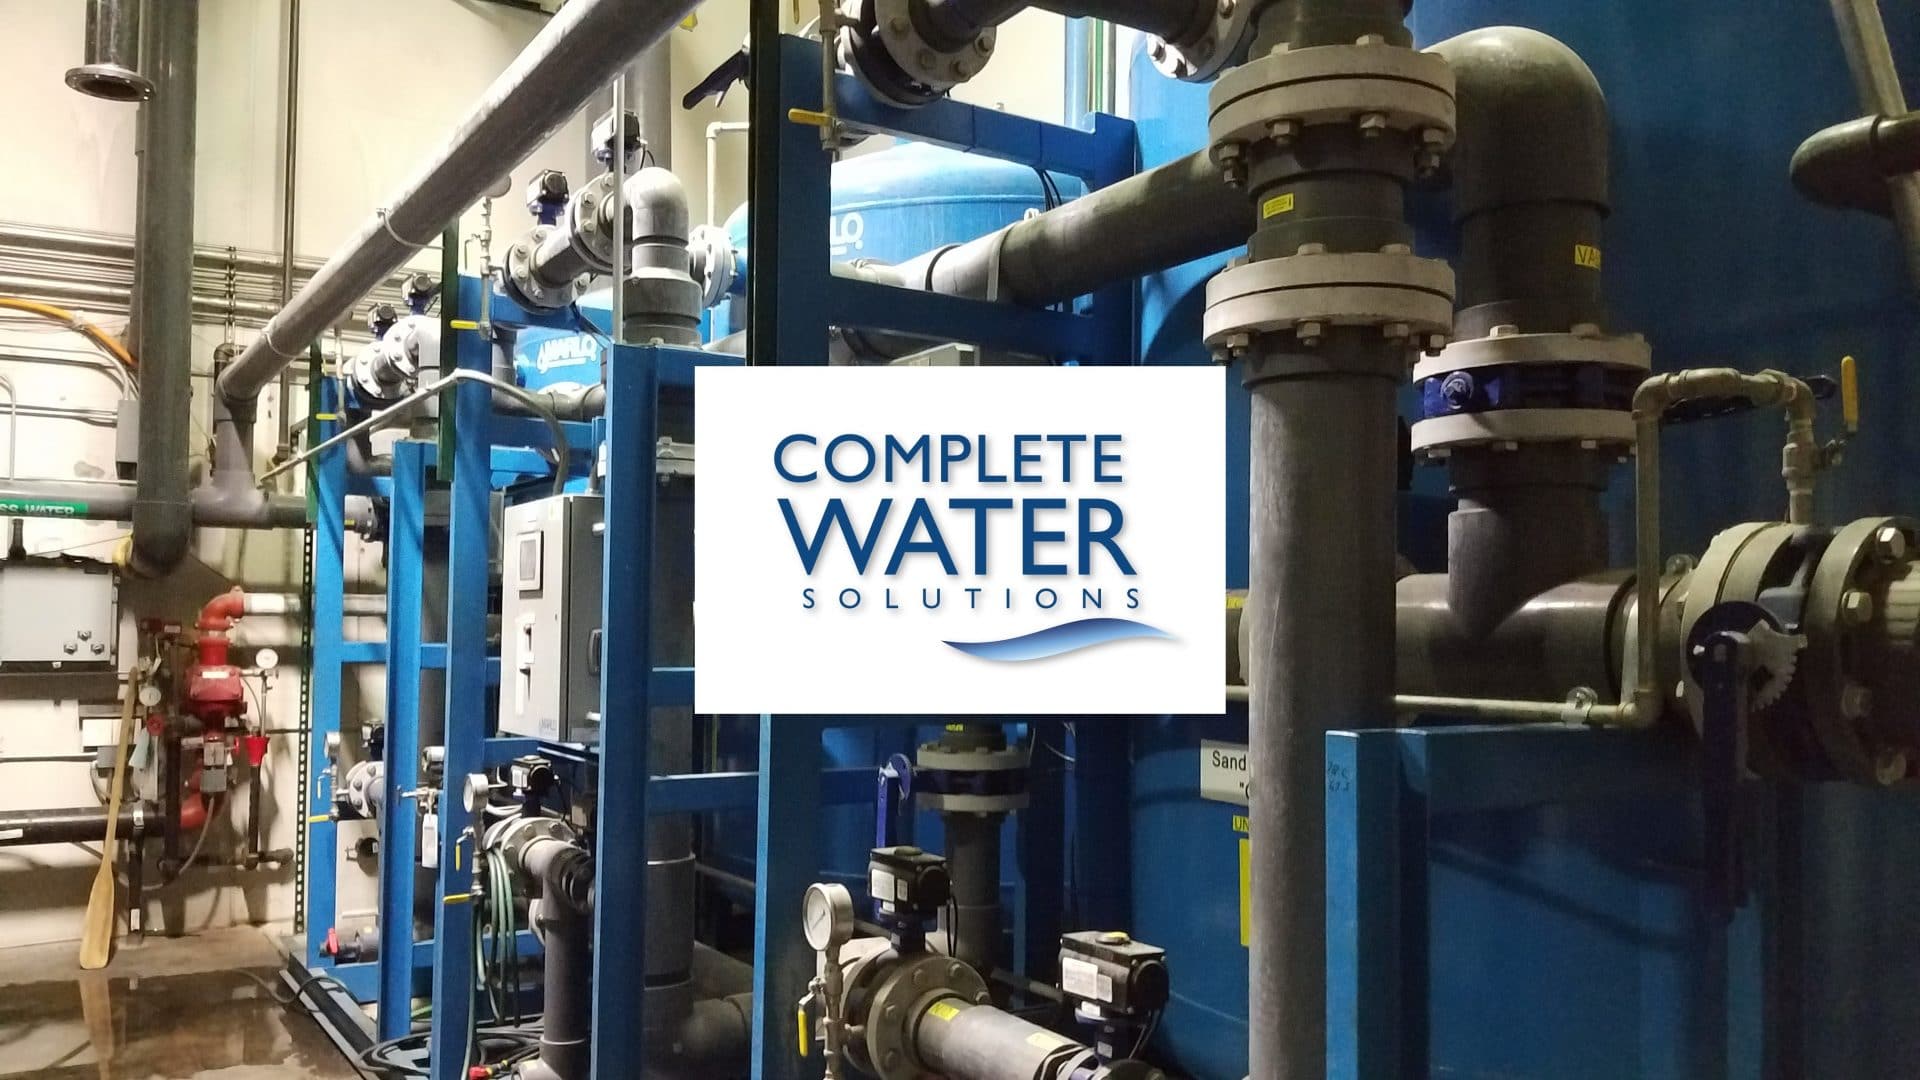 multimedia filter repair, complete water solutions, reverse osmosis filtration